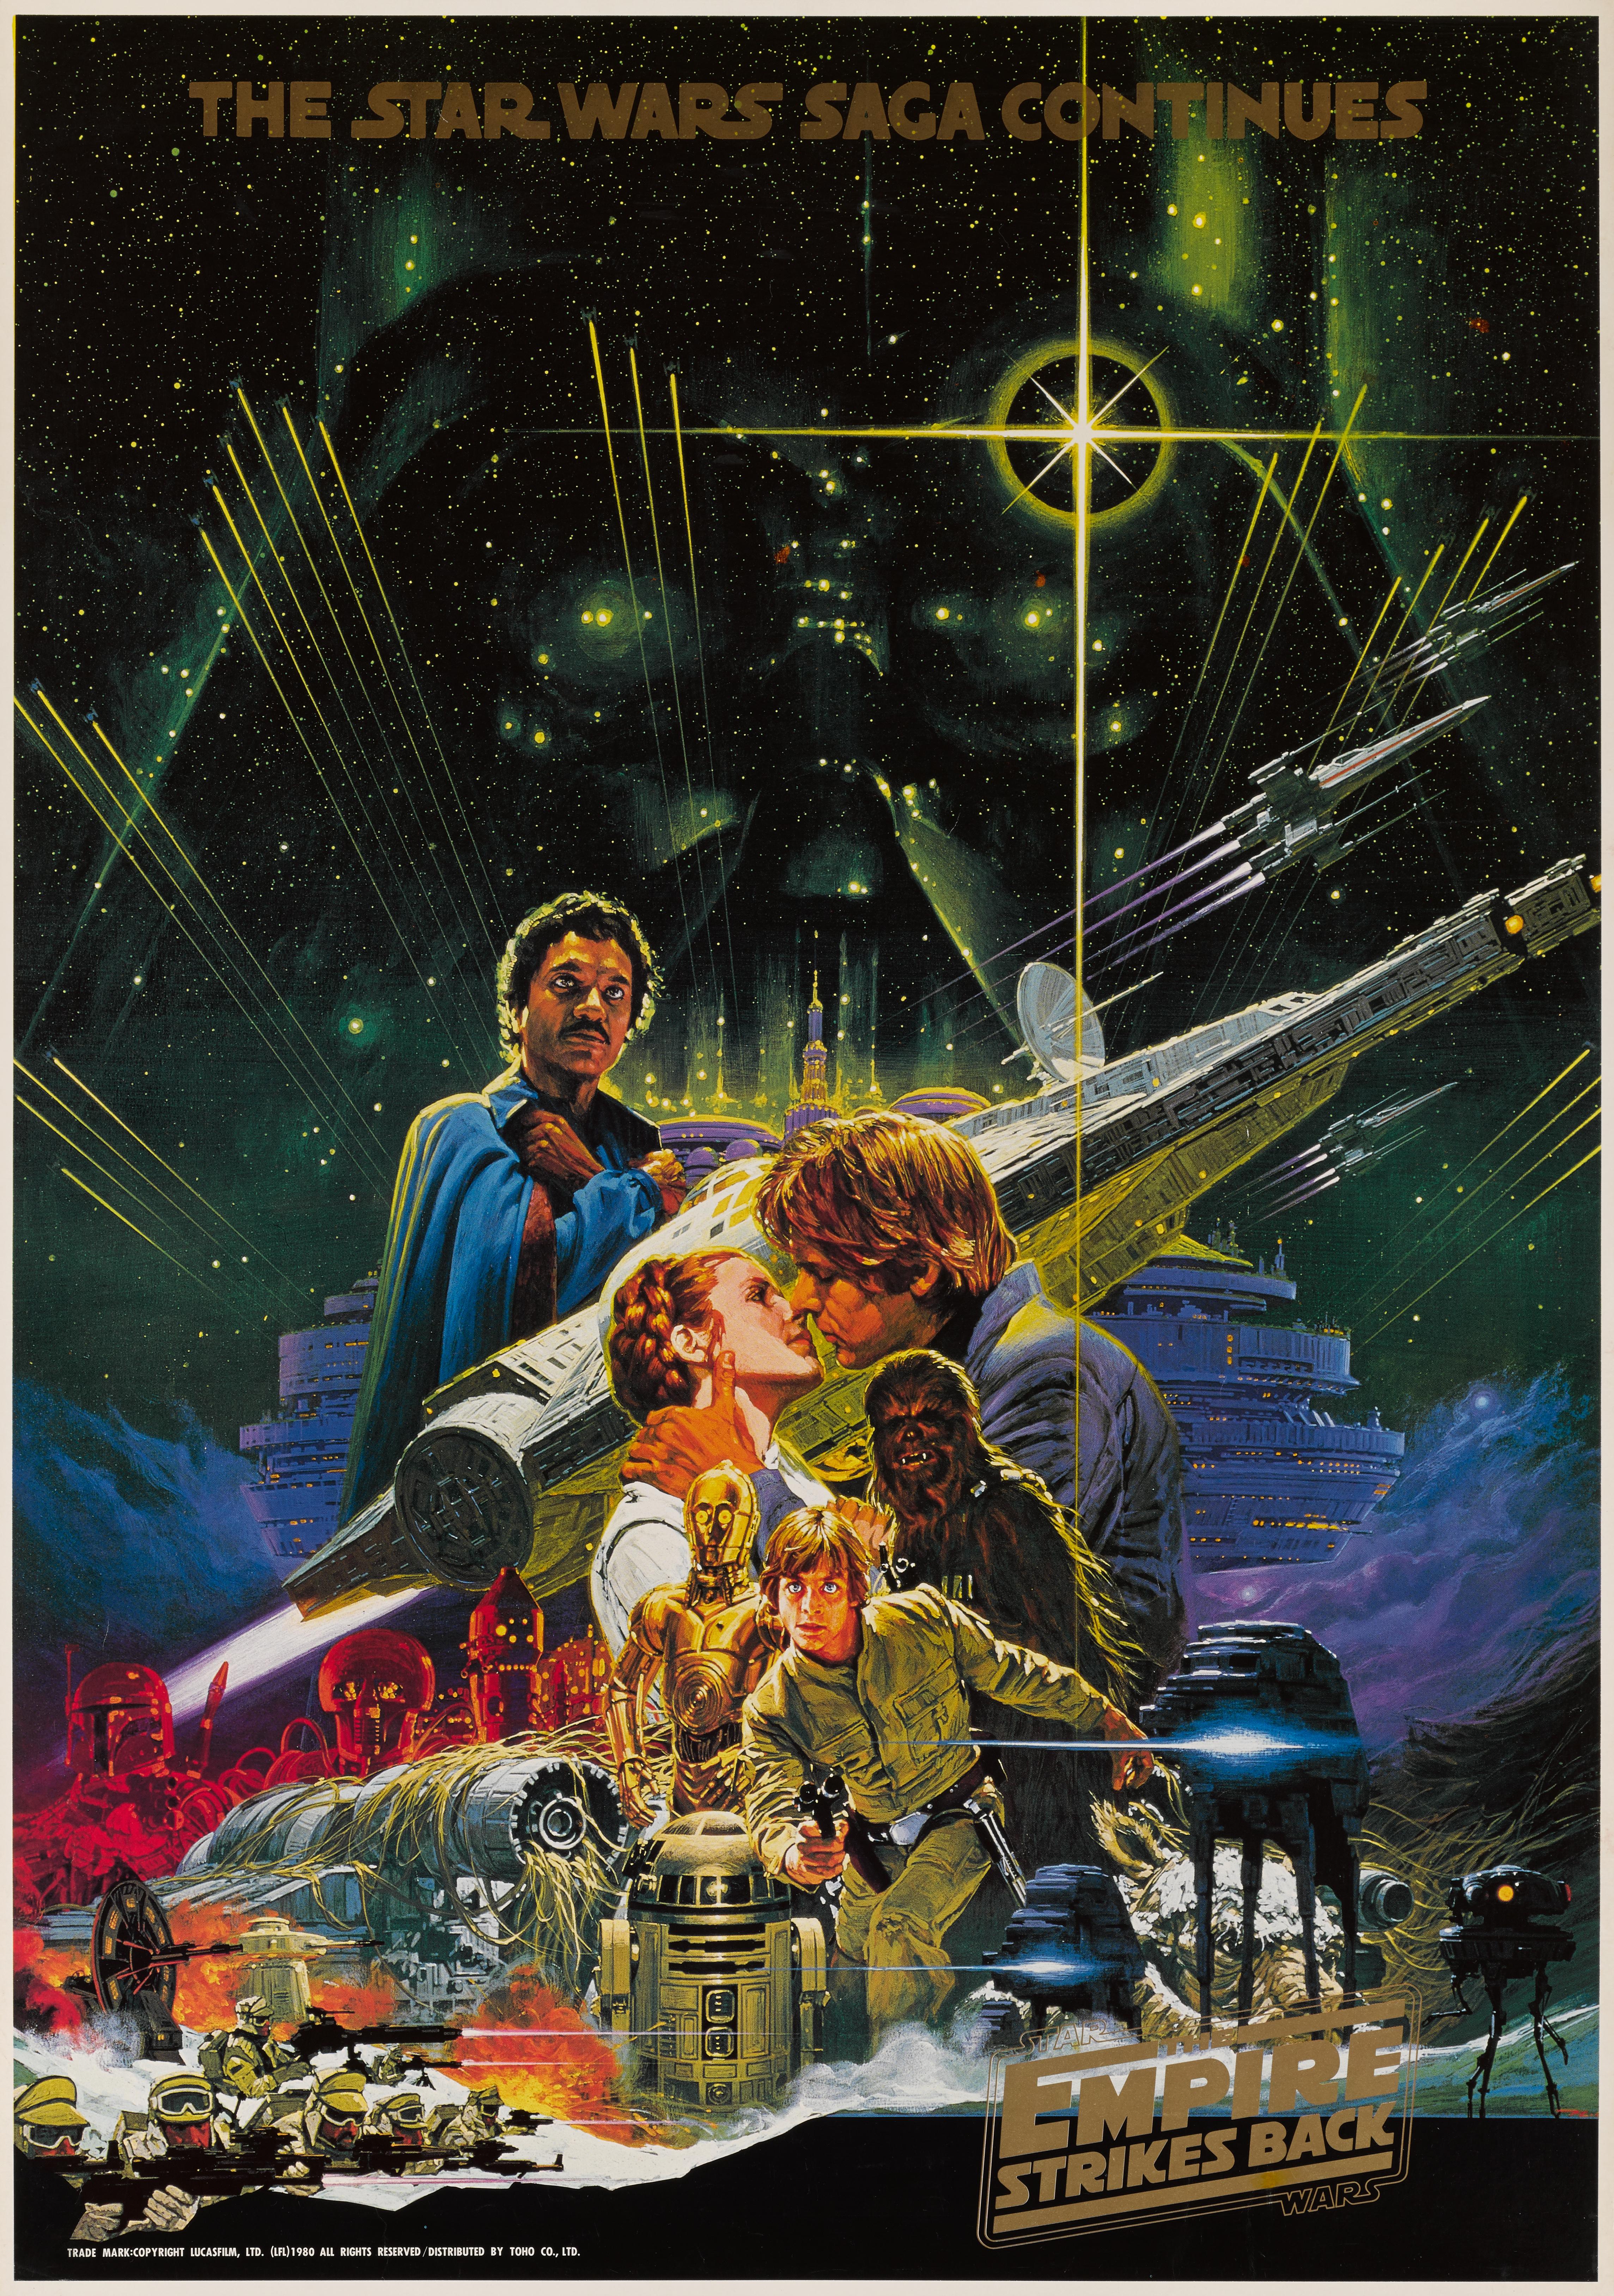 Original special Japanese poster Toho style it was designed to be sold to the public, but only at theaters during the first release of the film. The Empire Strikes Back also known as (Star Wars: Episode V, The Empire Strikes Back) this was the